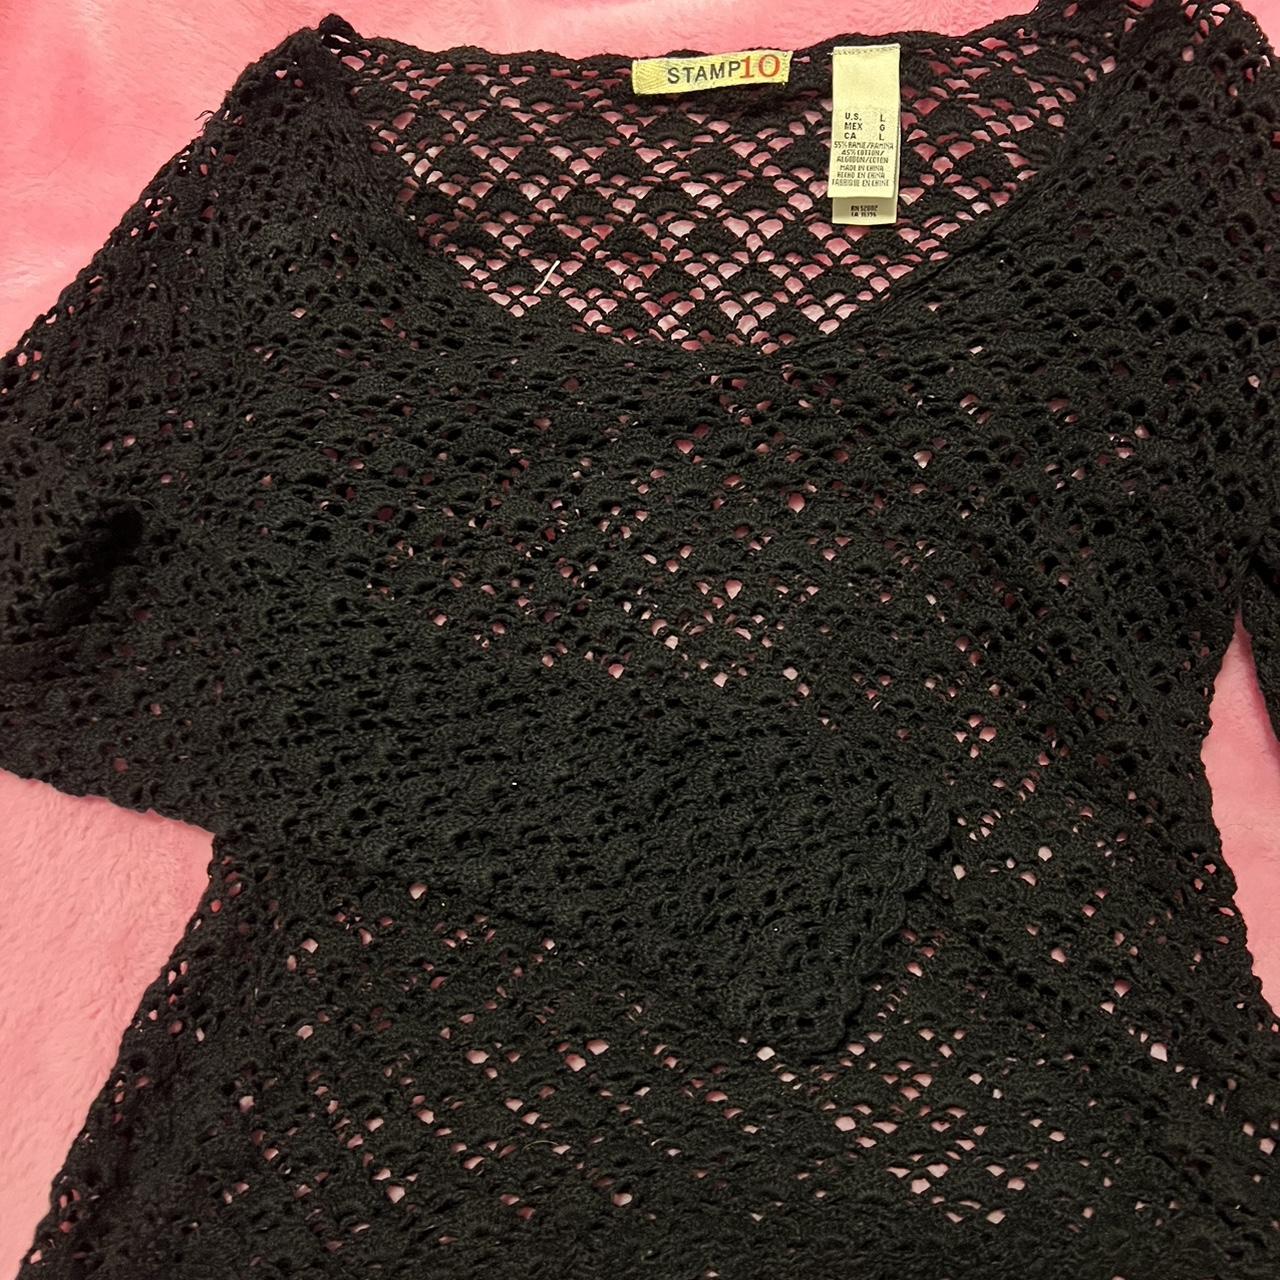 L crocheted top , super cute as a cover up or just 2... - Depop